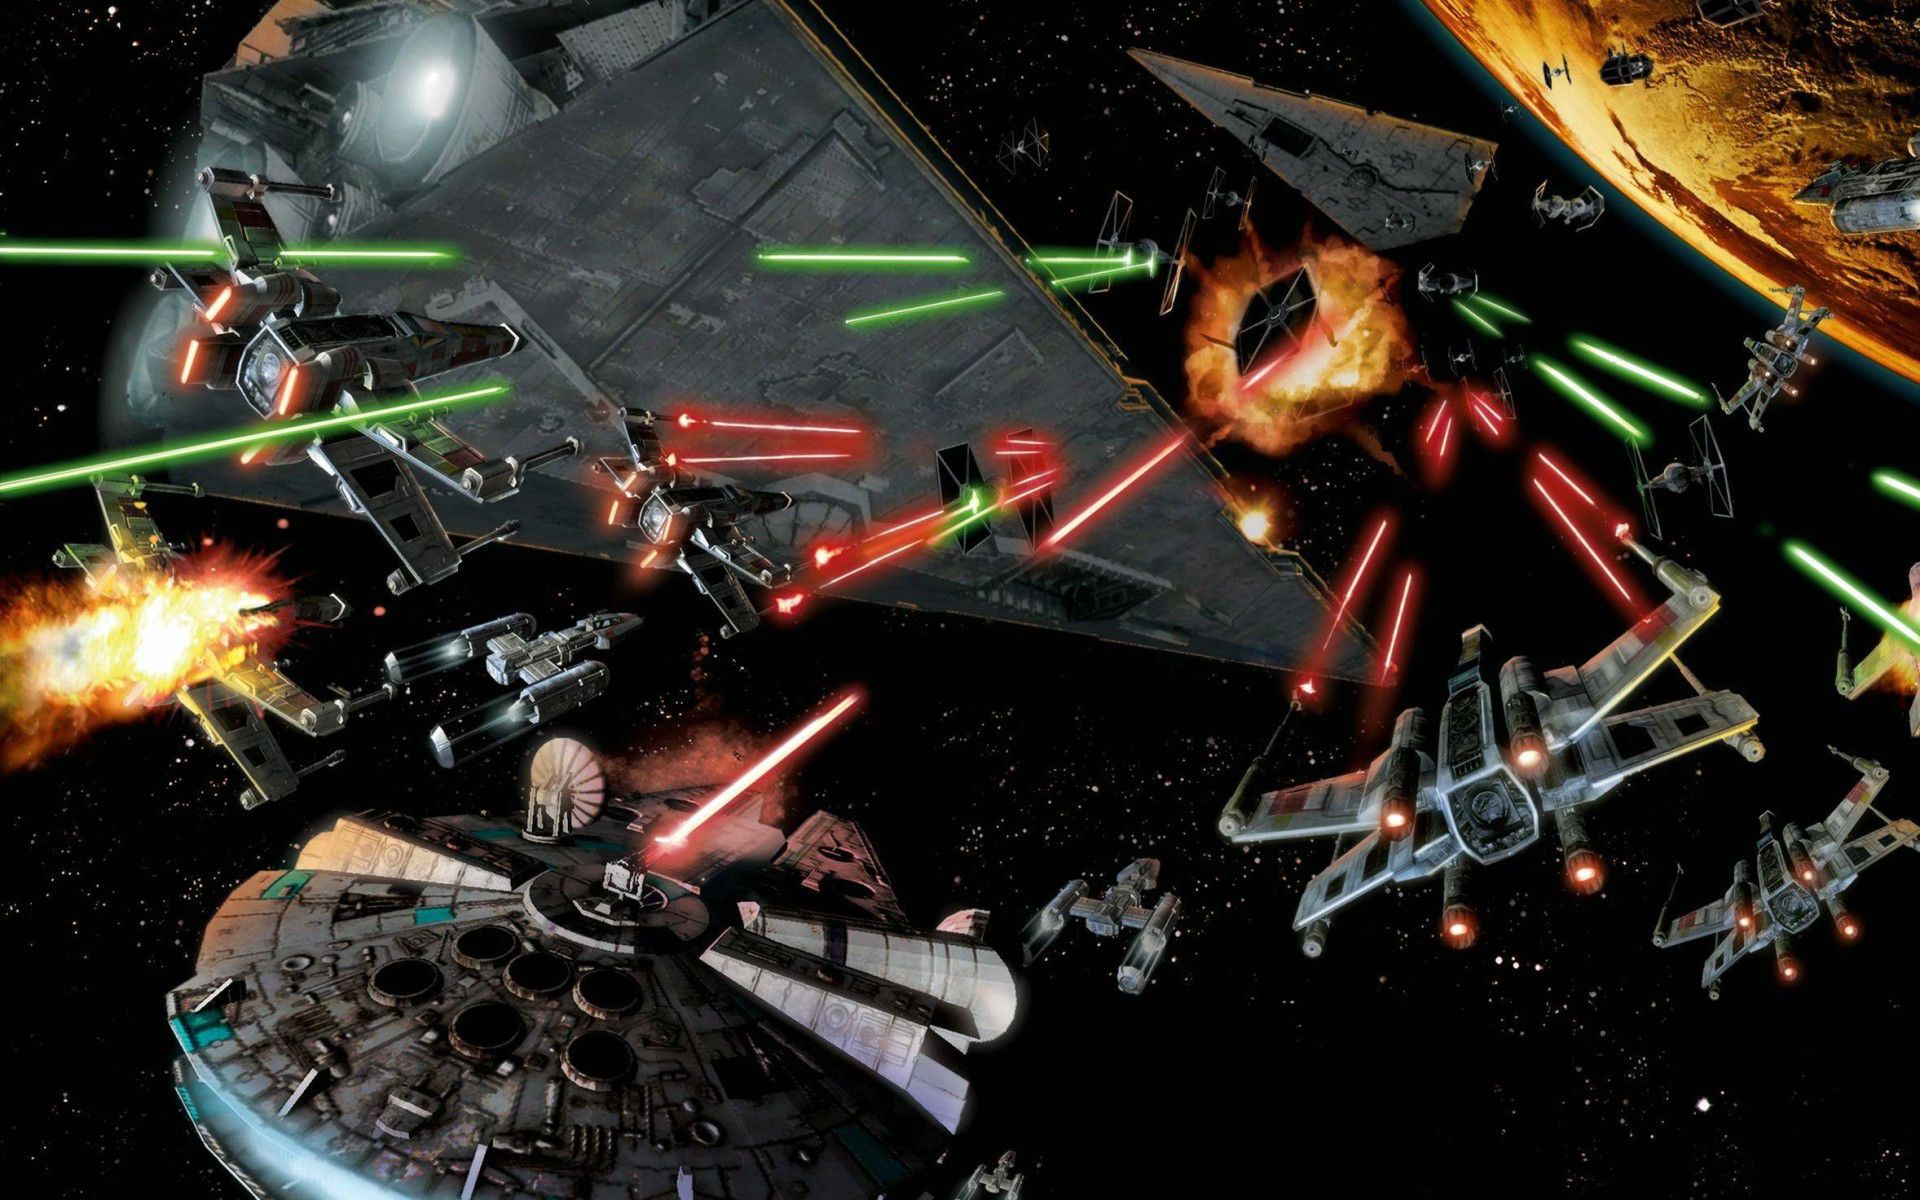 What happens to lasers in space battles? Fiction & Fantasy Stack Exchange